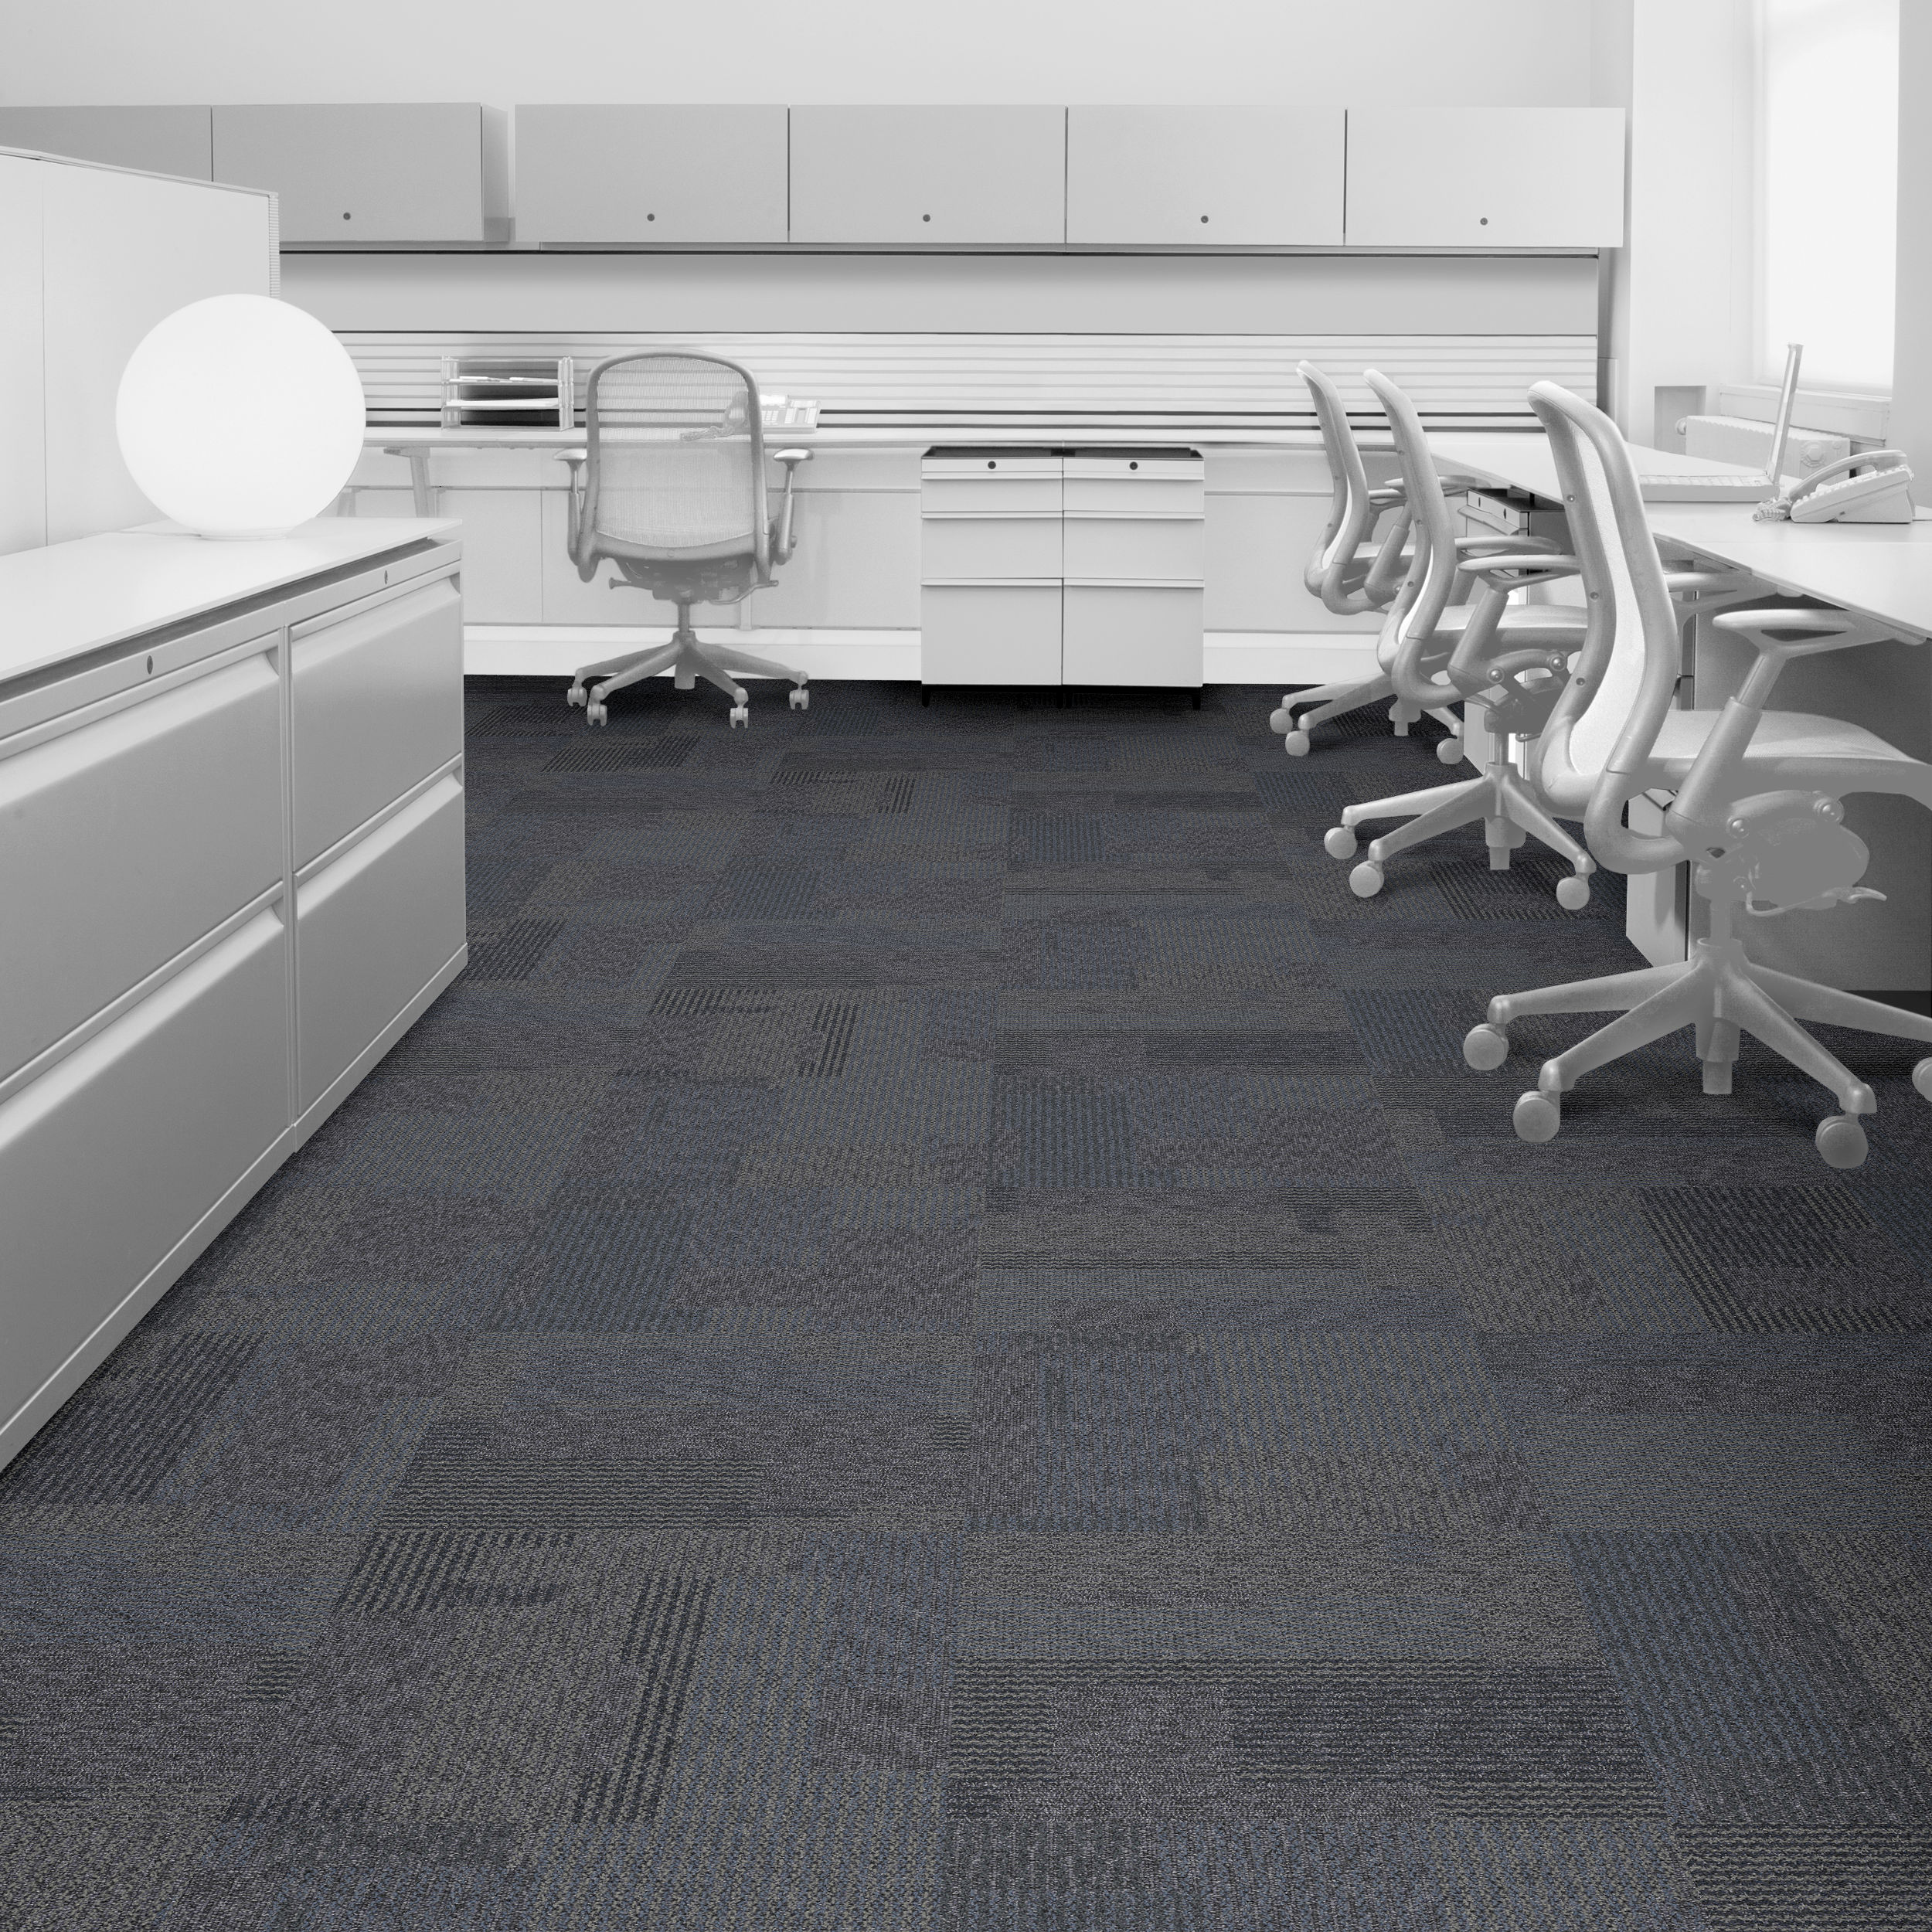 Baring Transformation Carpet Tile in office setting.